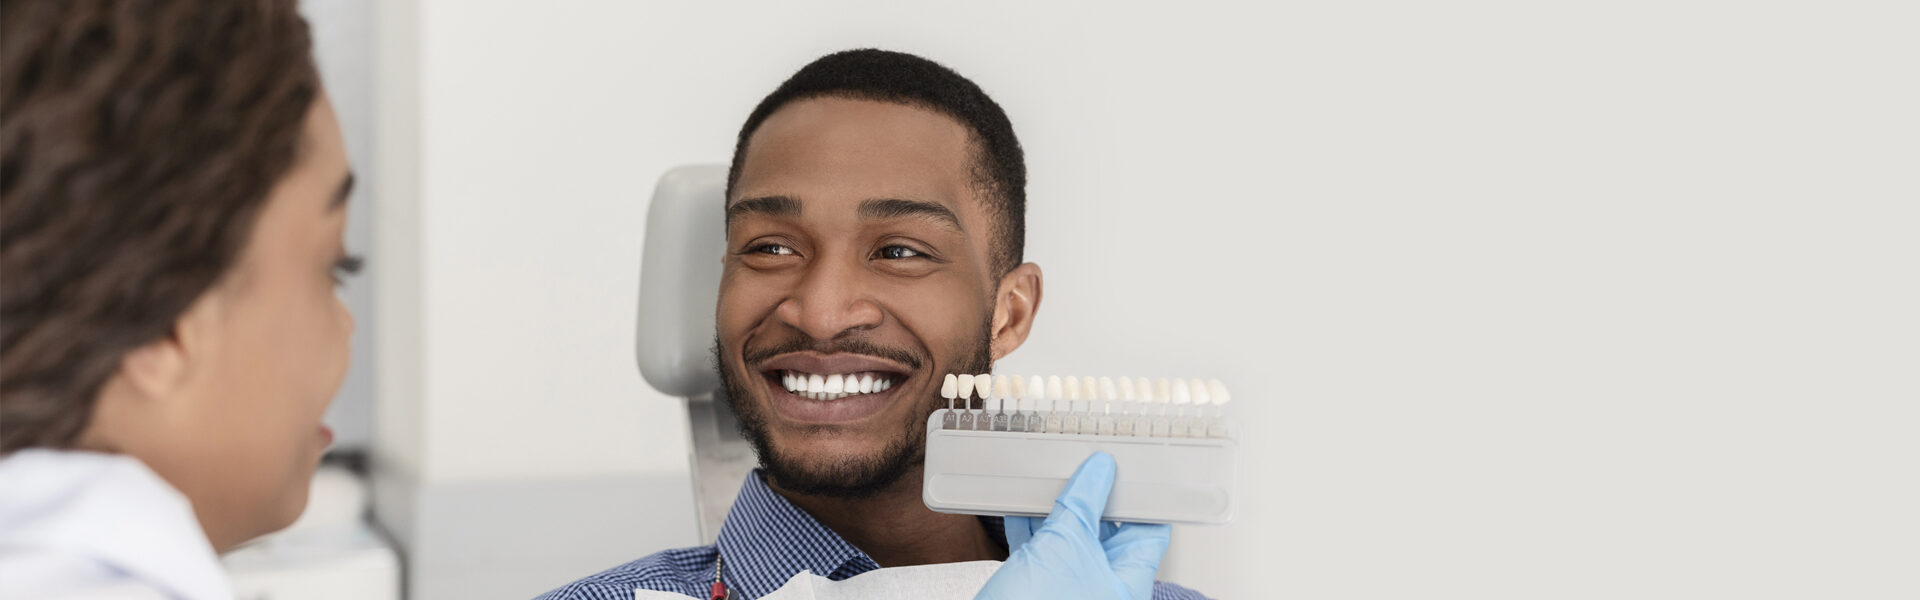 5 Commonly Asked Questions About Dental Veneers